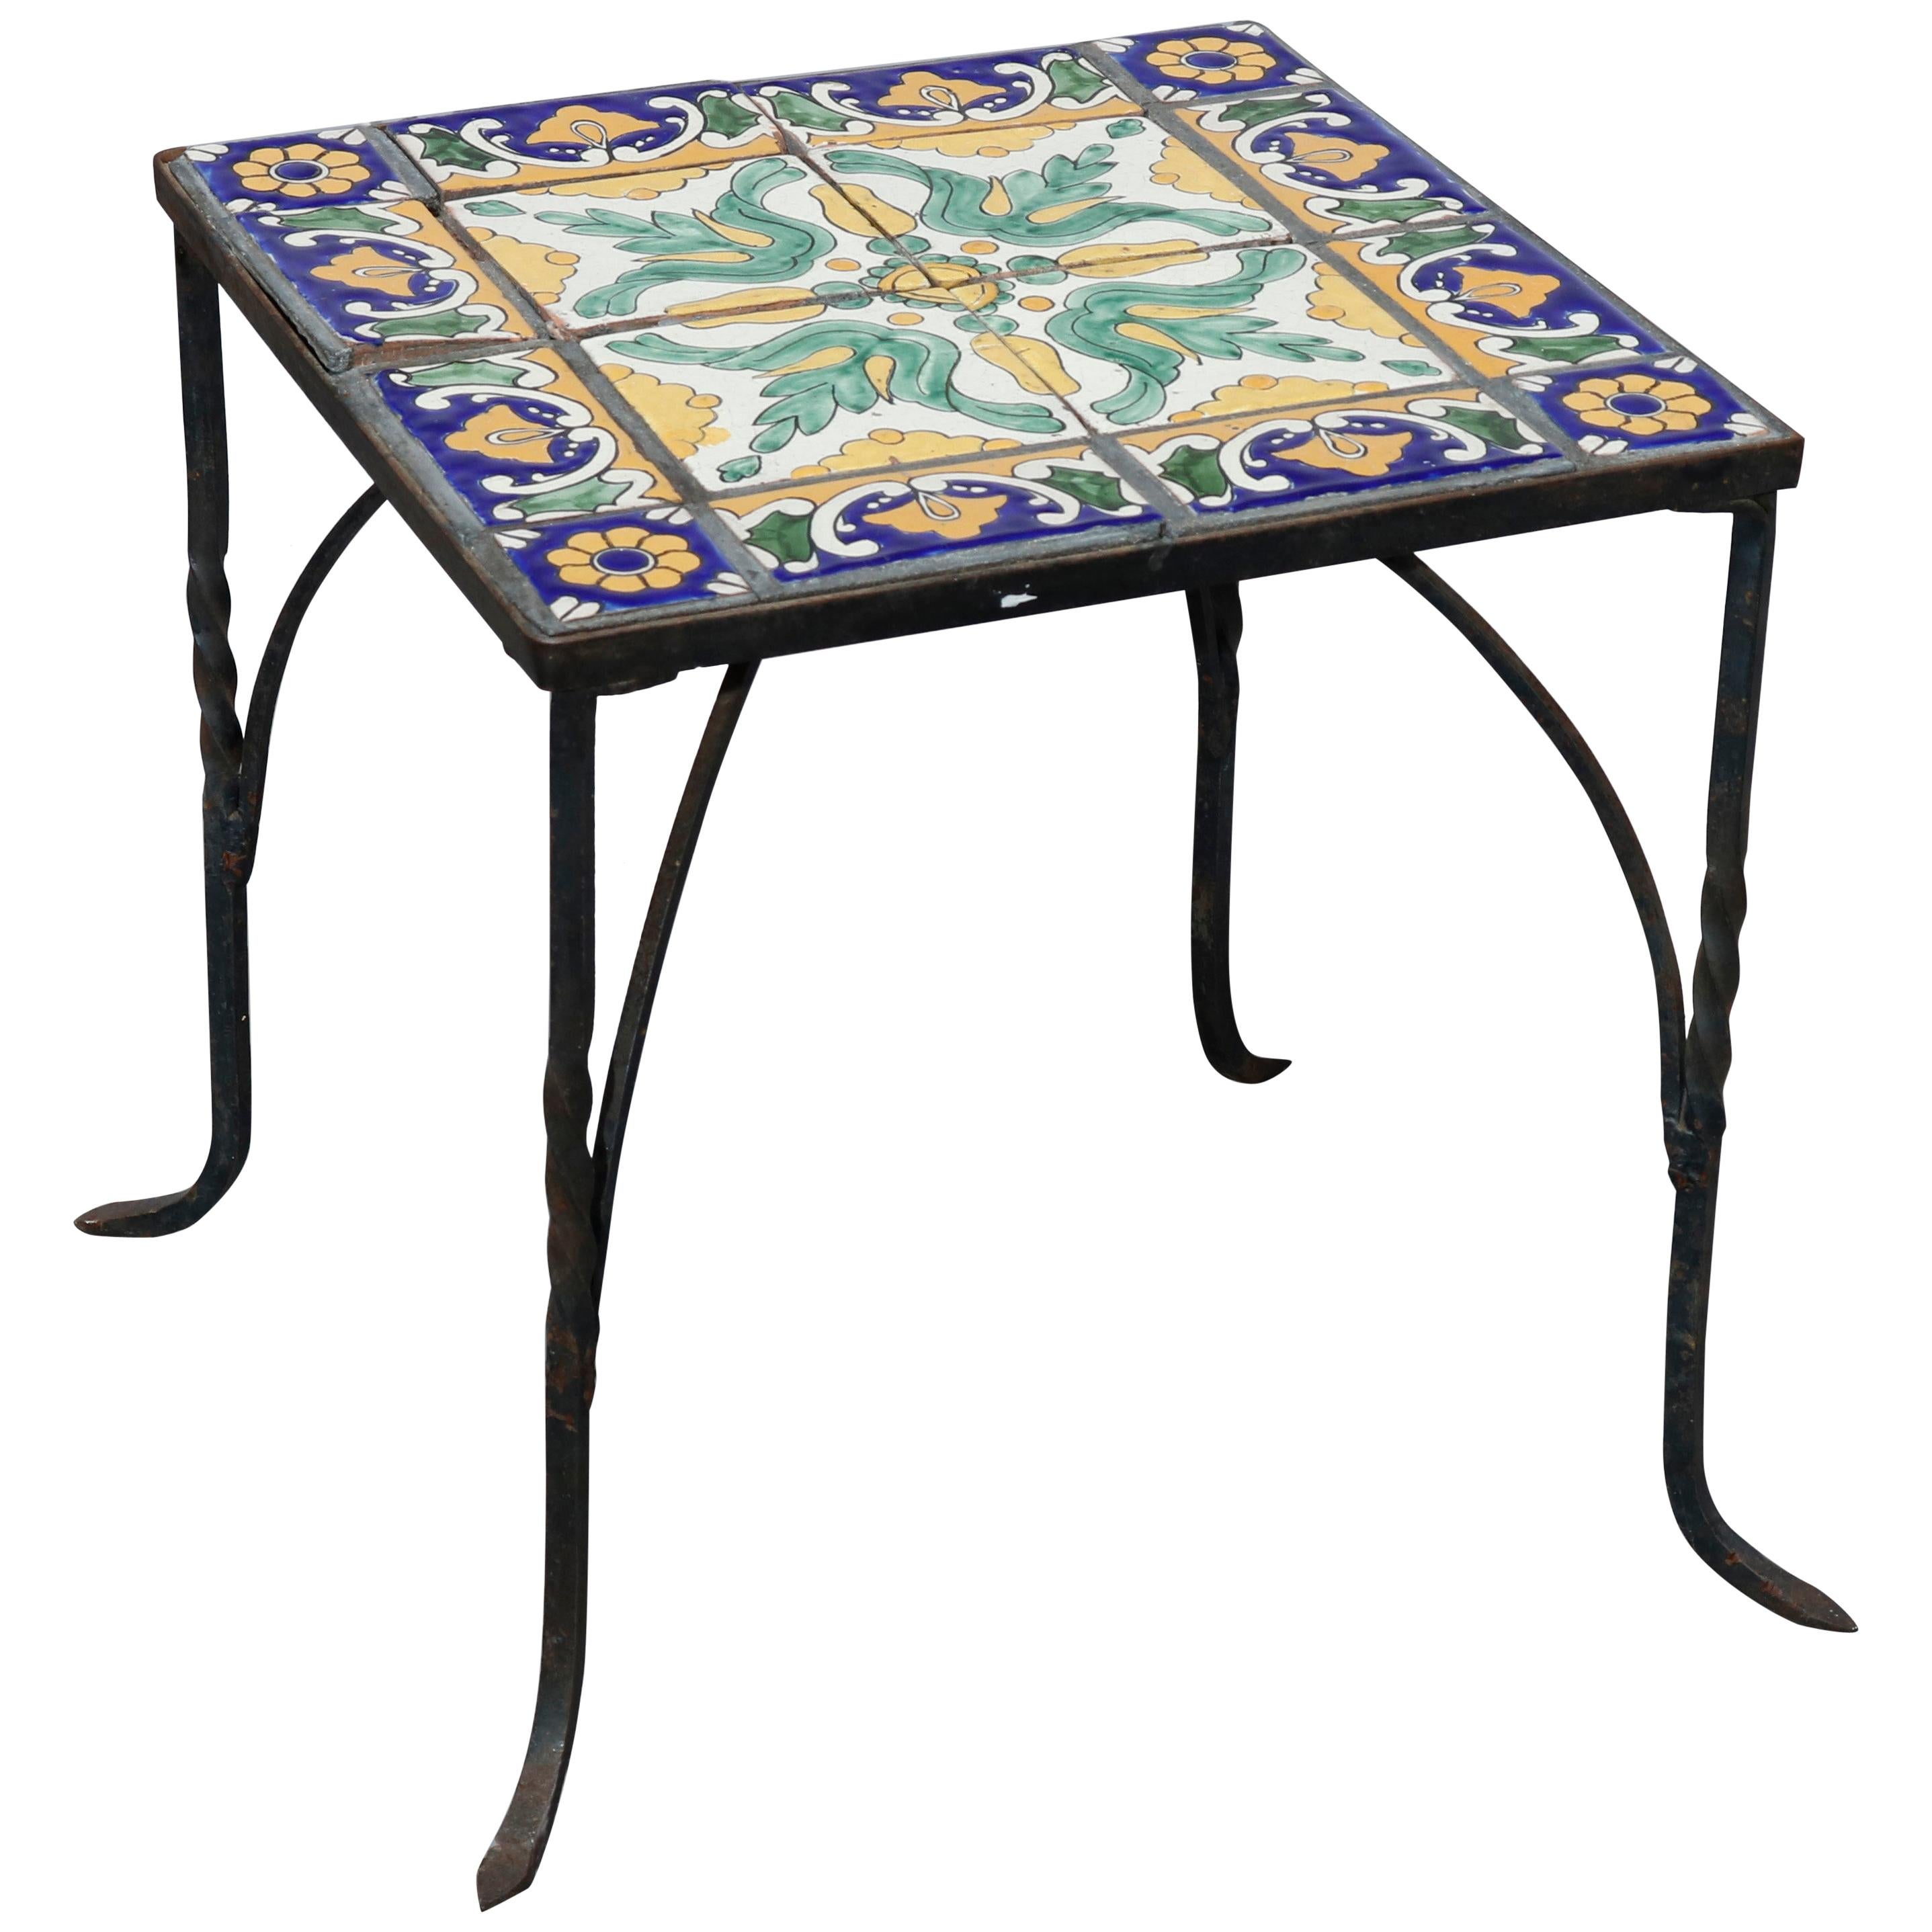 Antique Arts & Crafts Oscar Bach School Wrought Iron & Tile Side Table, c1930